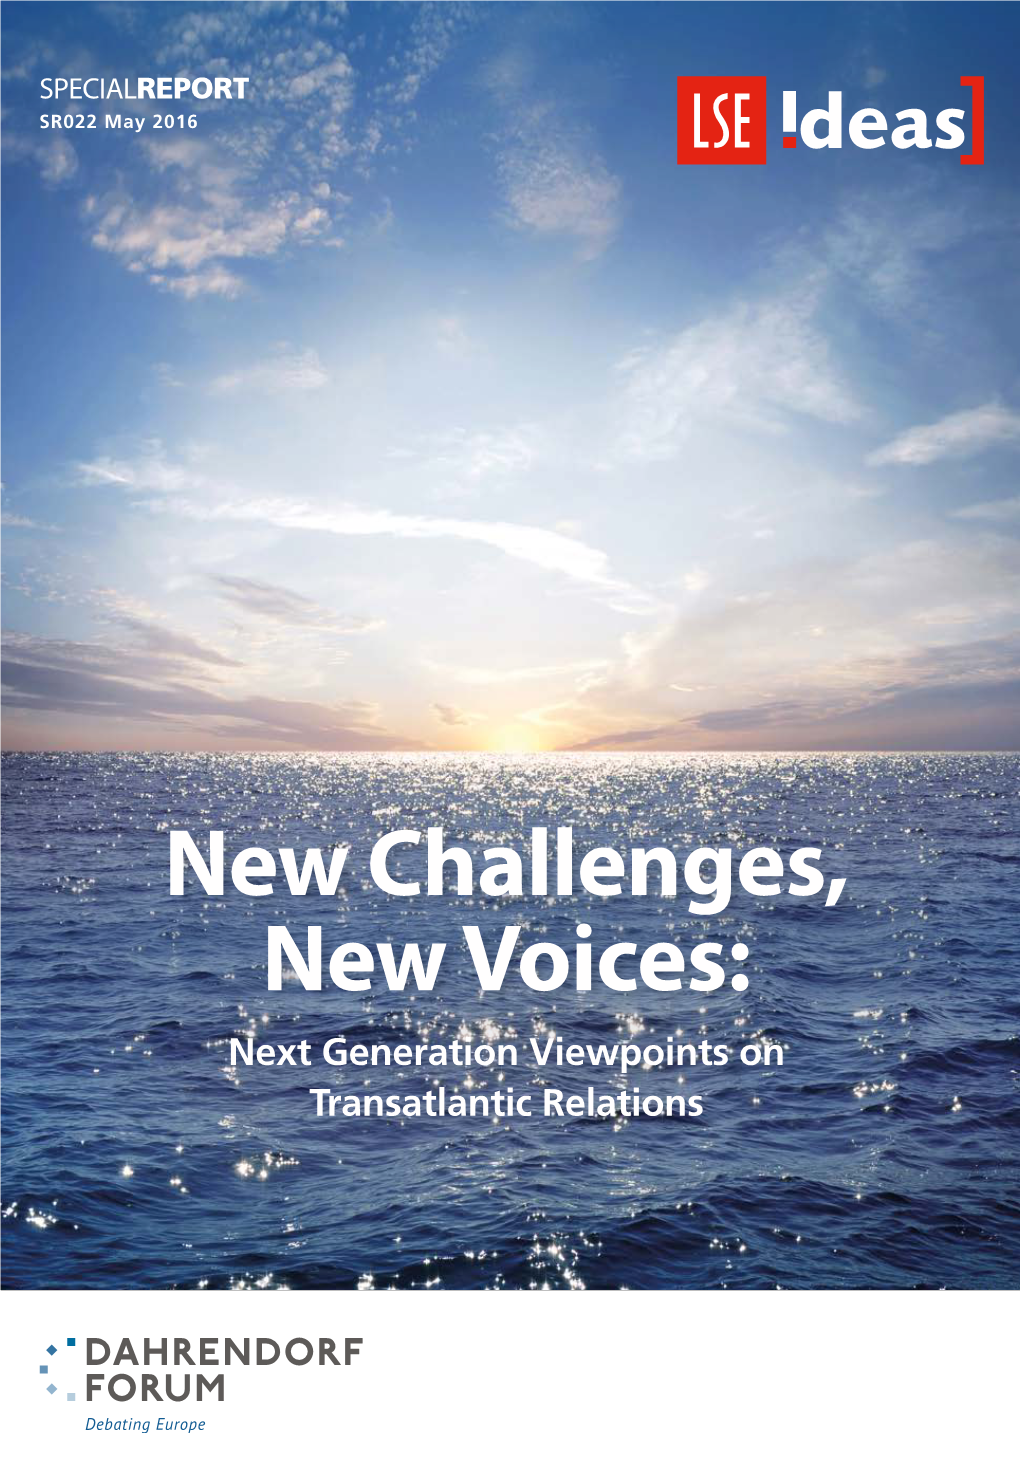 New Challenges, New Voices: Next Generation Viewpoints on Transatlantic Relations